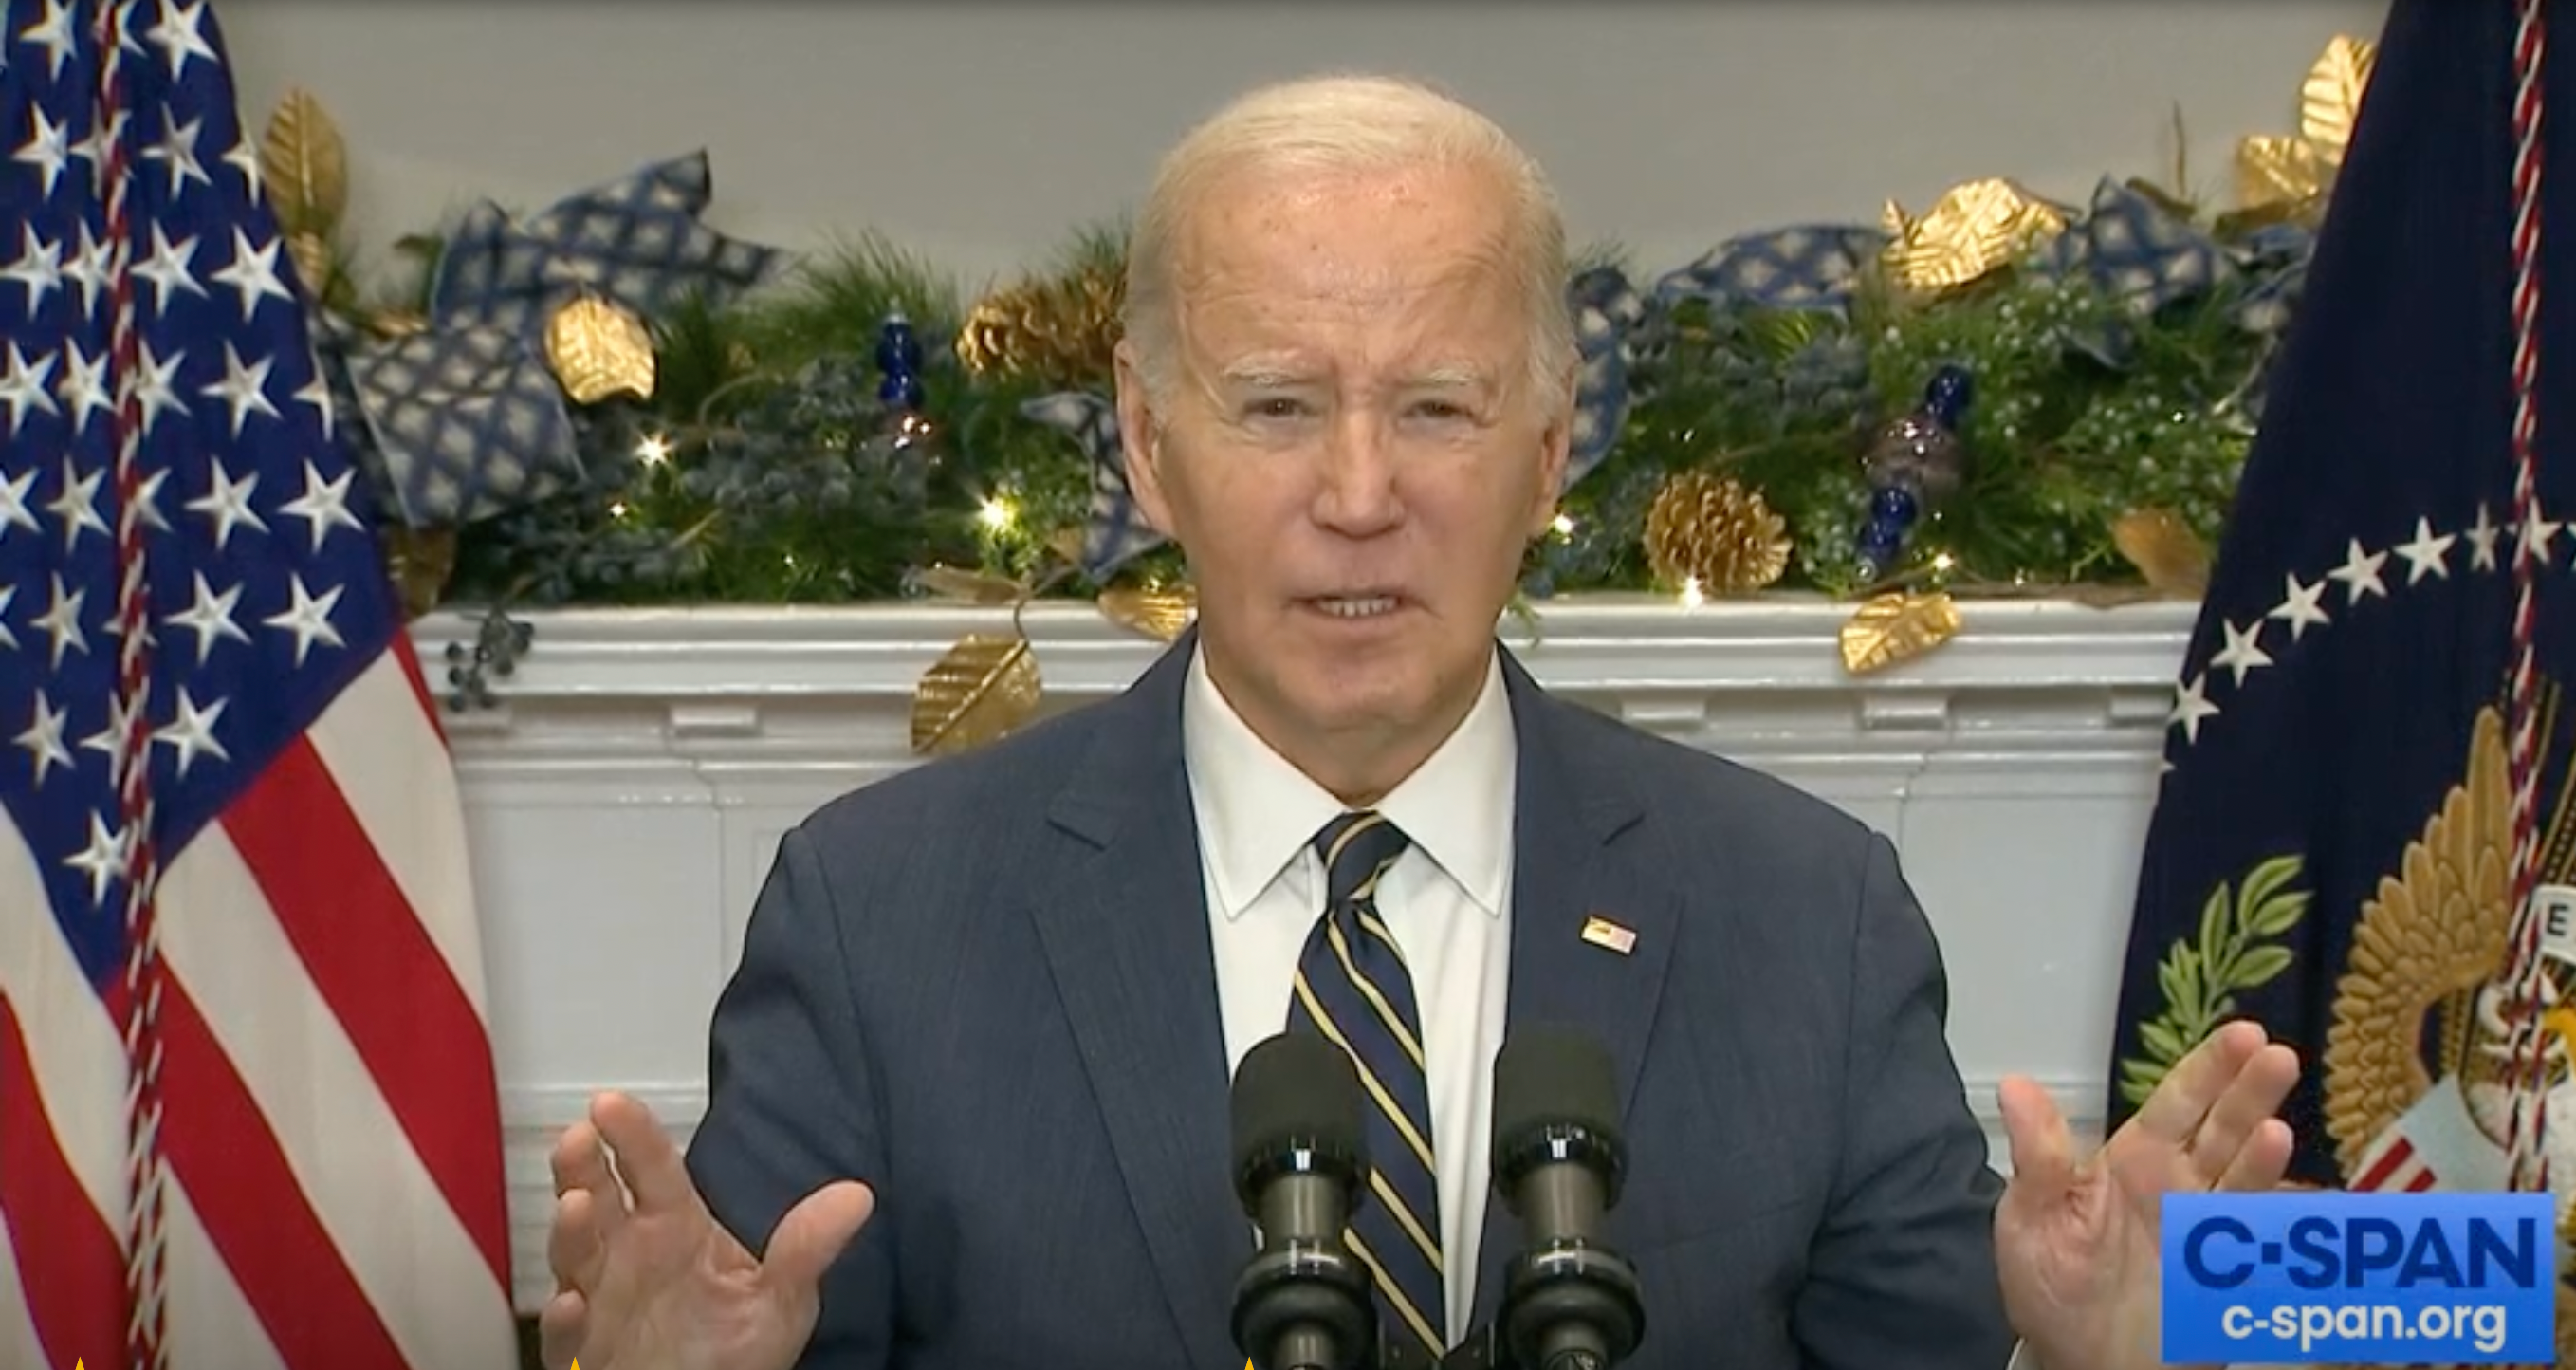 Biden warns of NATO war with Russia if aid disappears